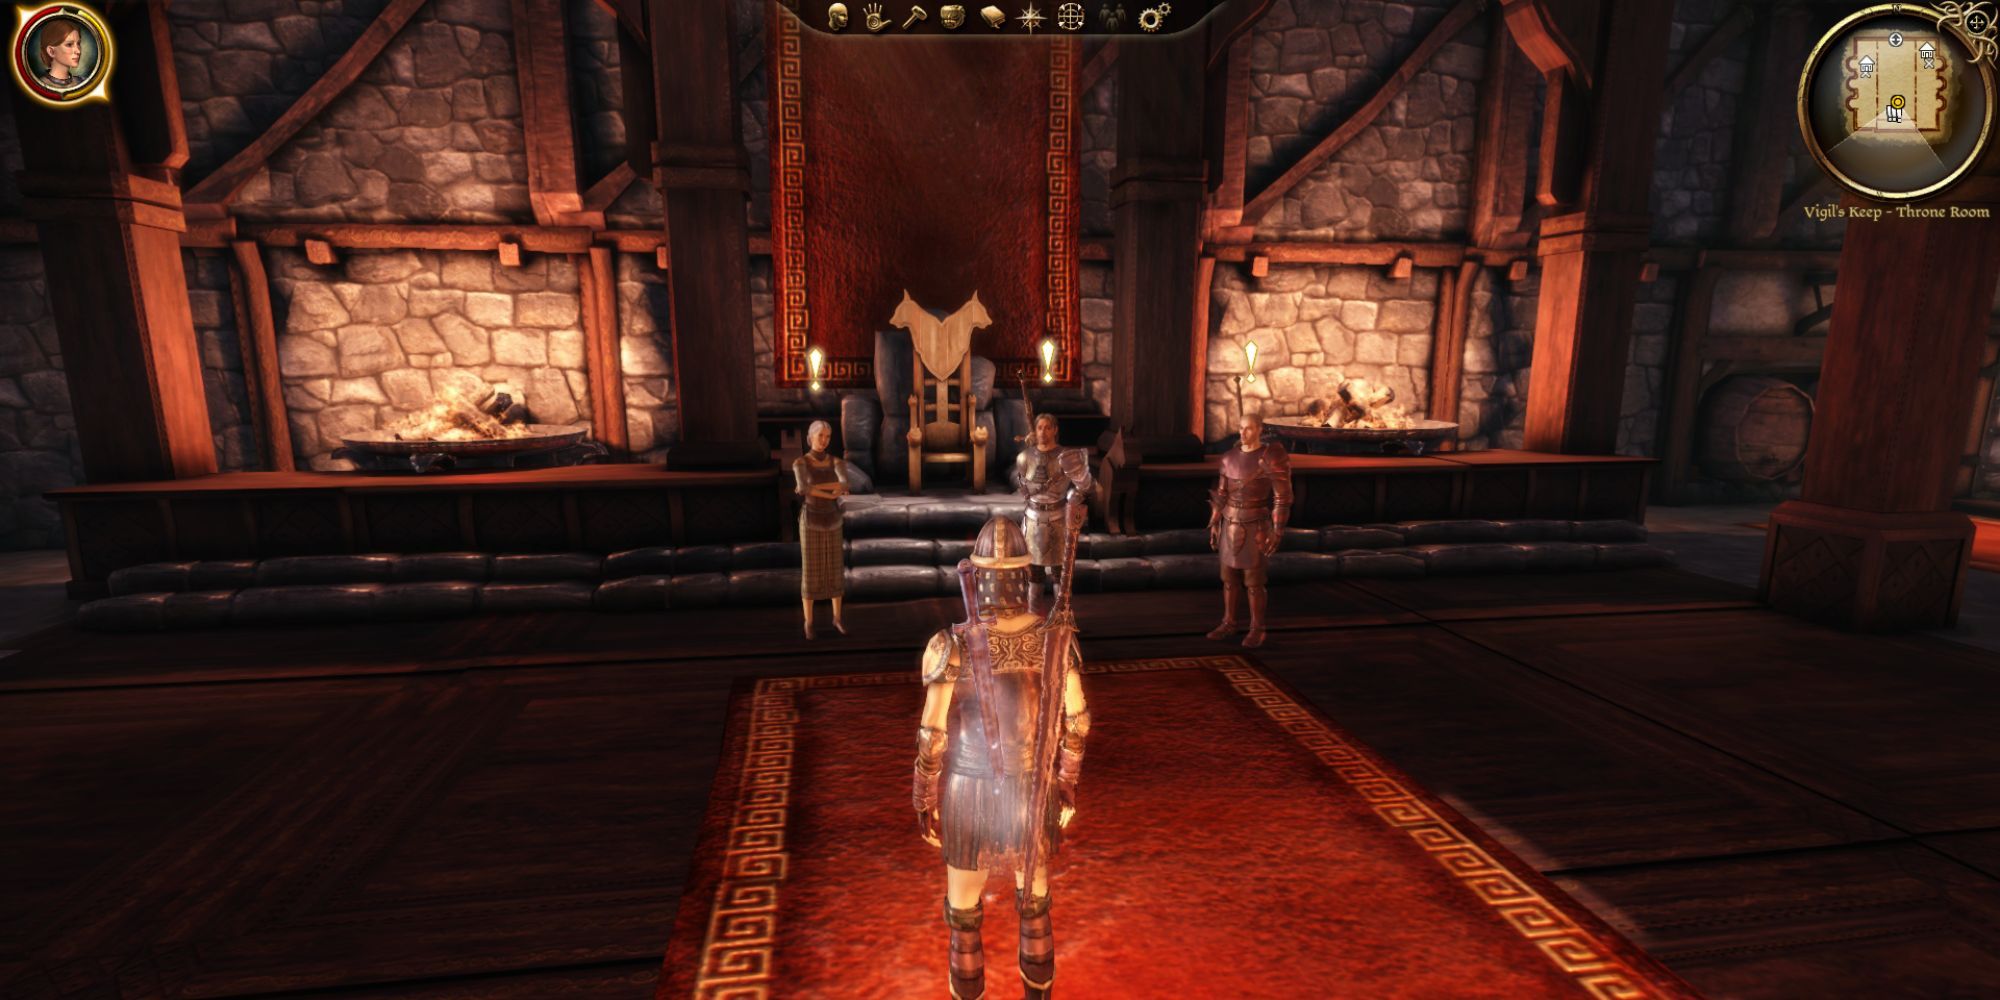 The Warden faces Mistress Woolsey, Seneschal Varel, and Captain Garavel in the throne room of Vigil's Keep